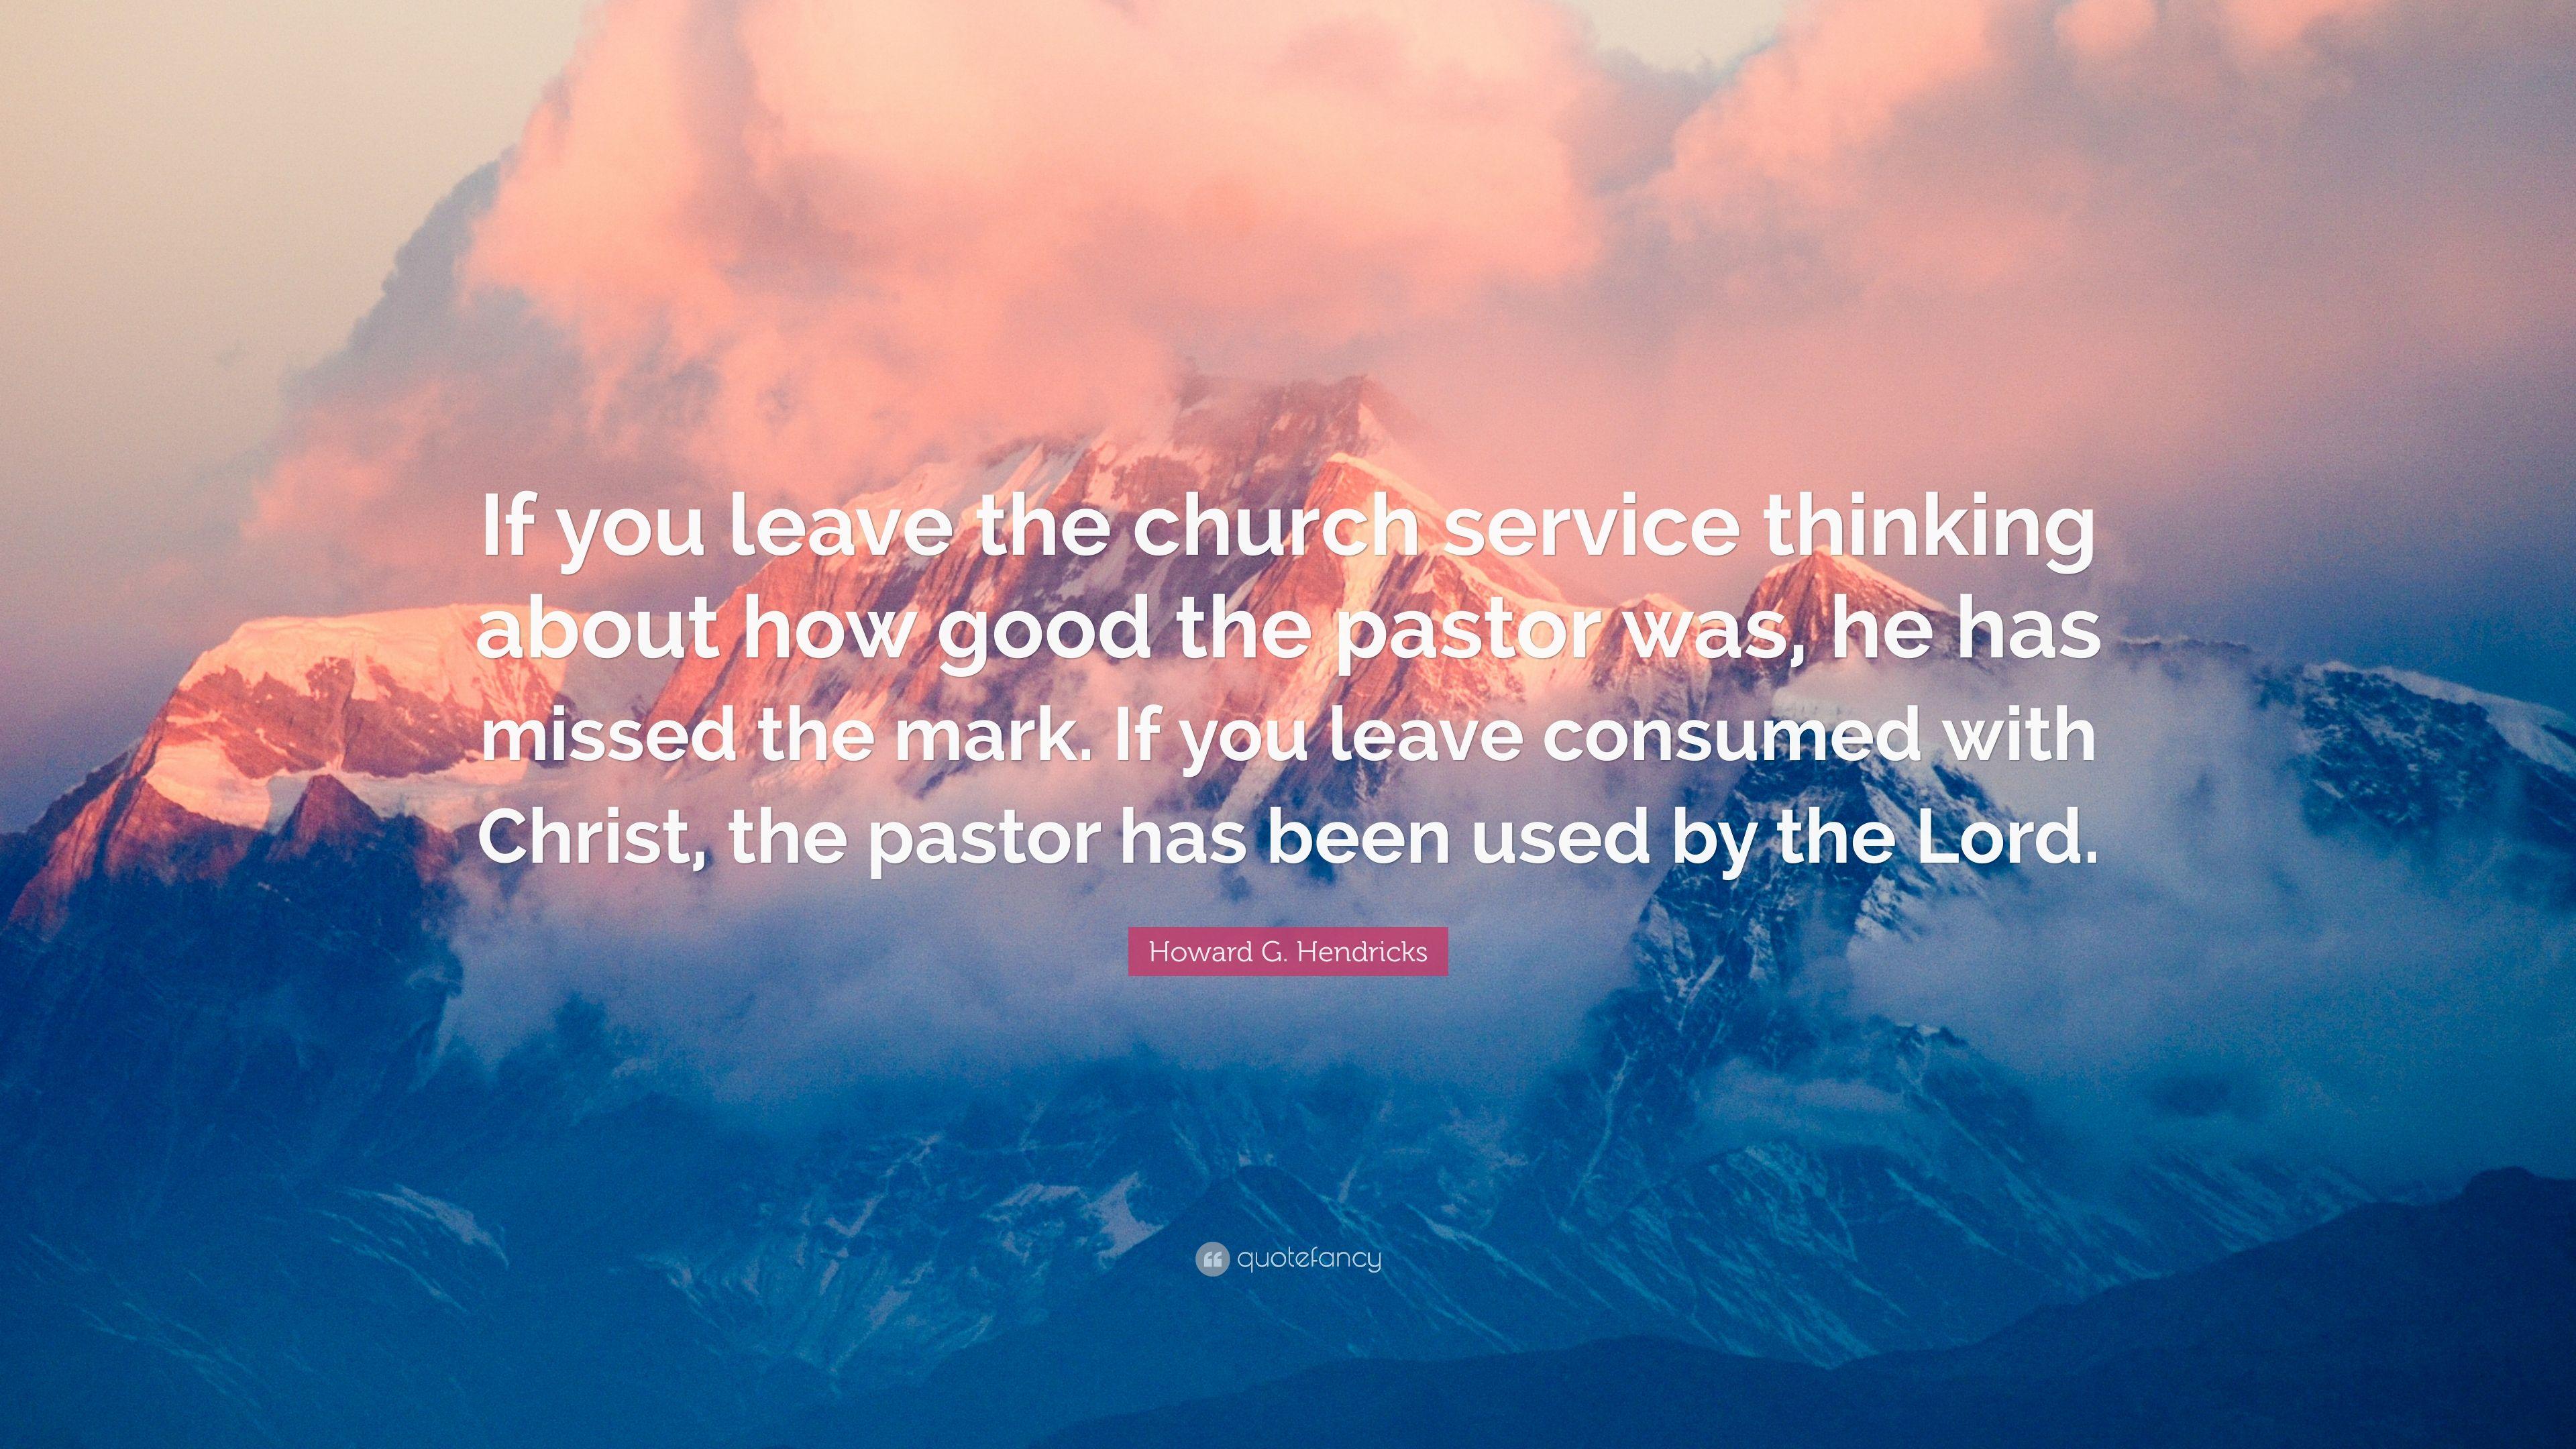 Howard G. Hendricks Quote: “If you leave the church service thinking